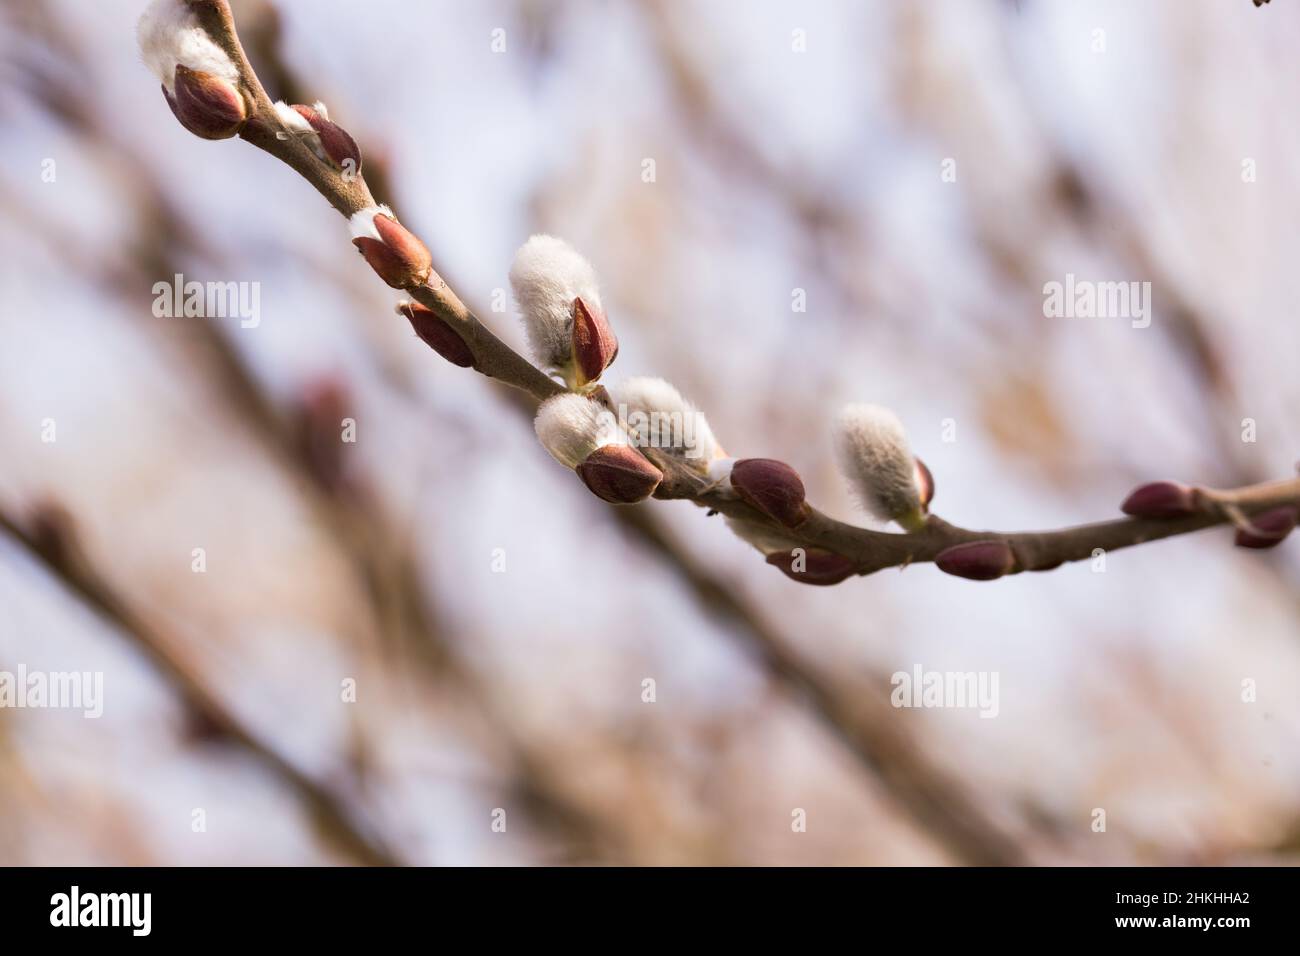 spring shoots on salix branches Stock Photo